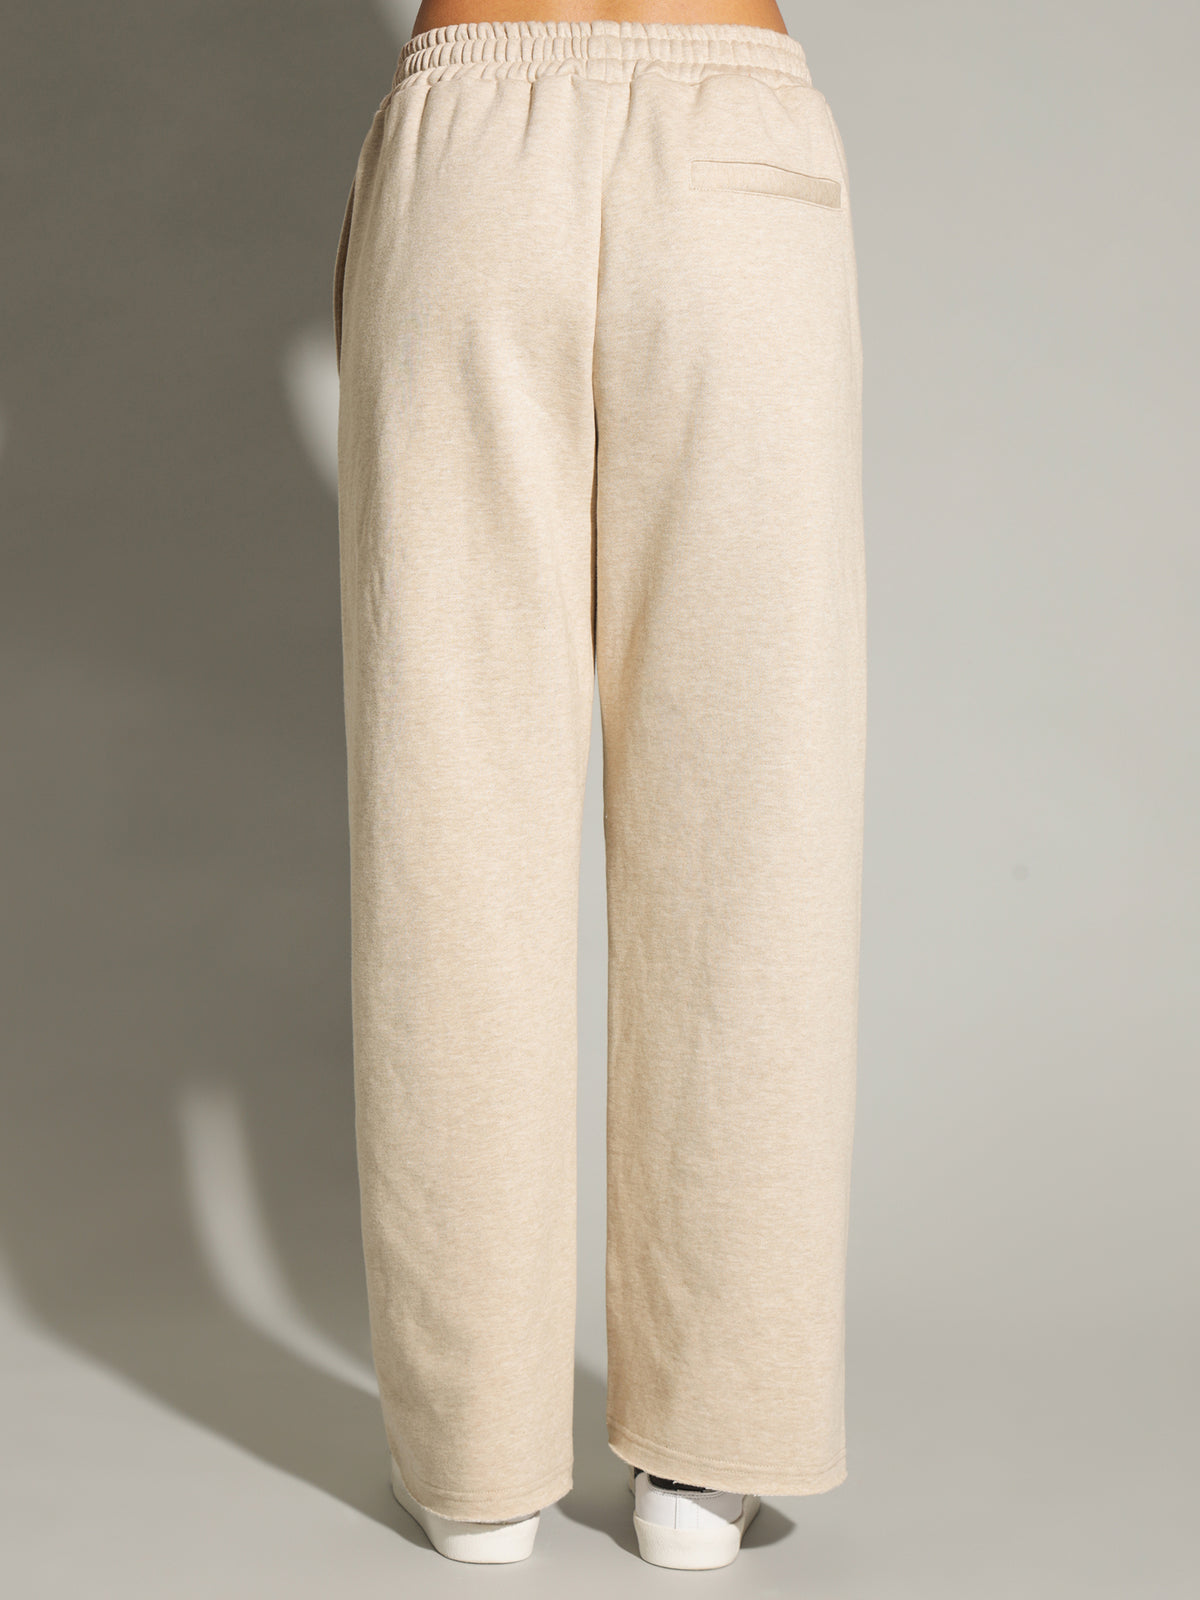 Track Pants in Warm Grey Marle